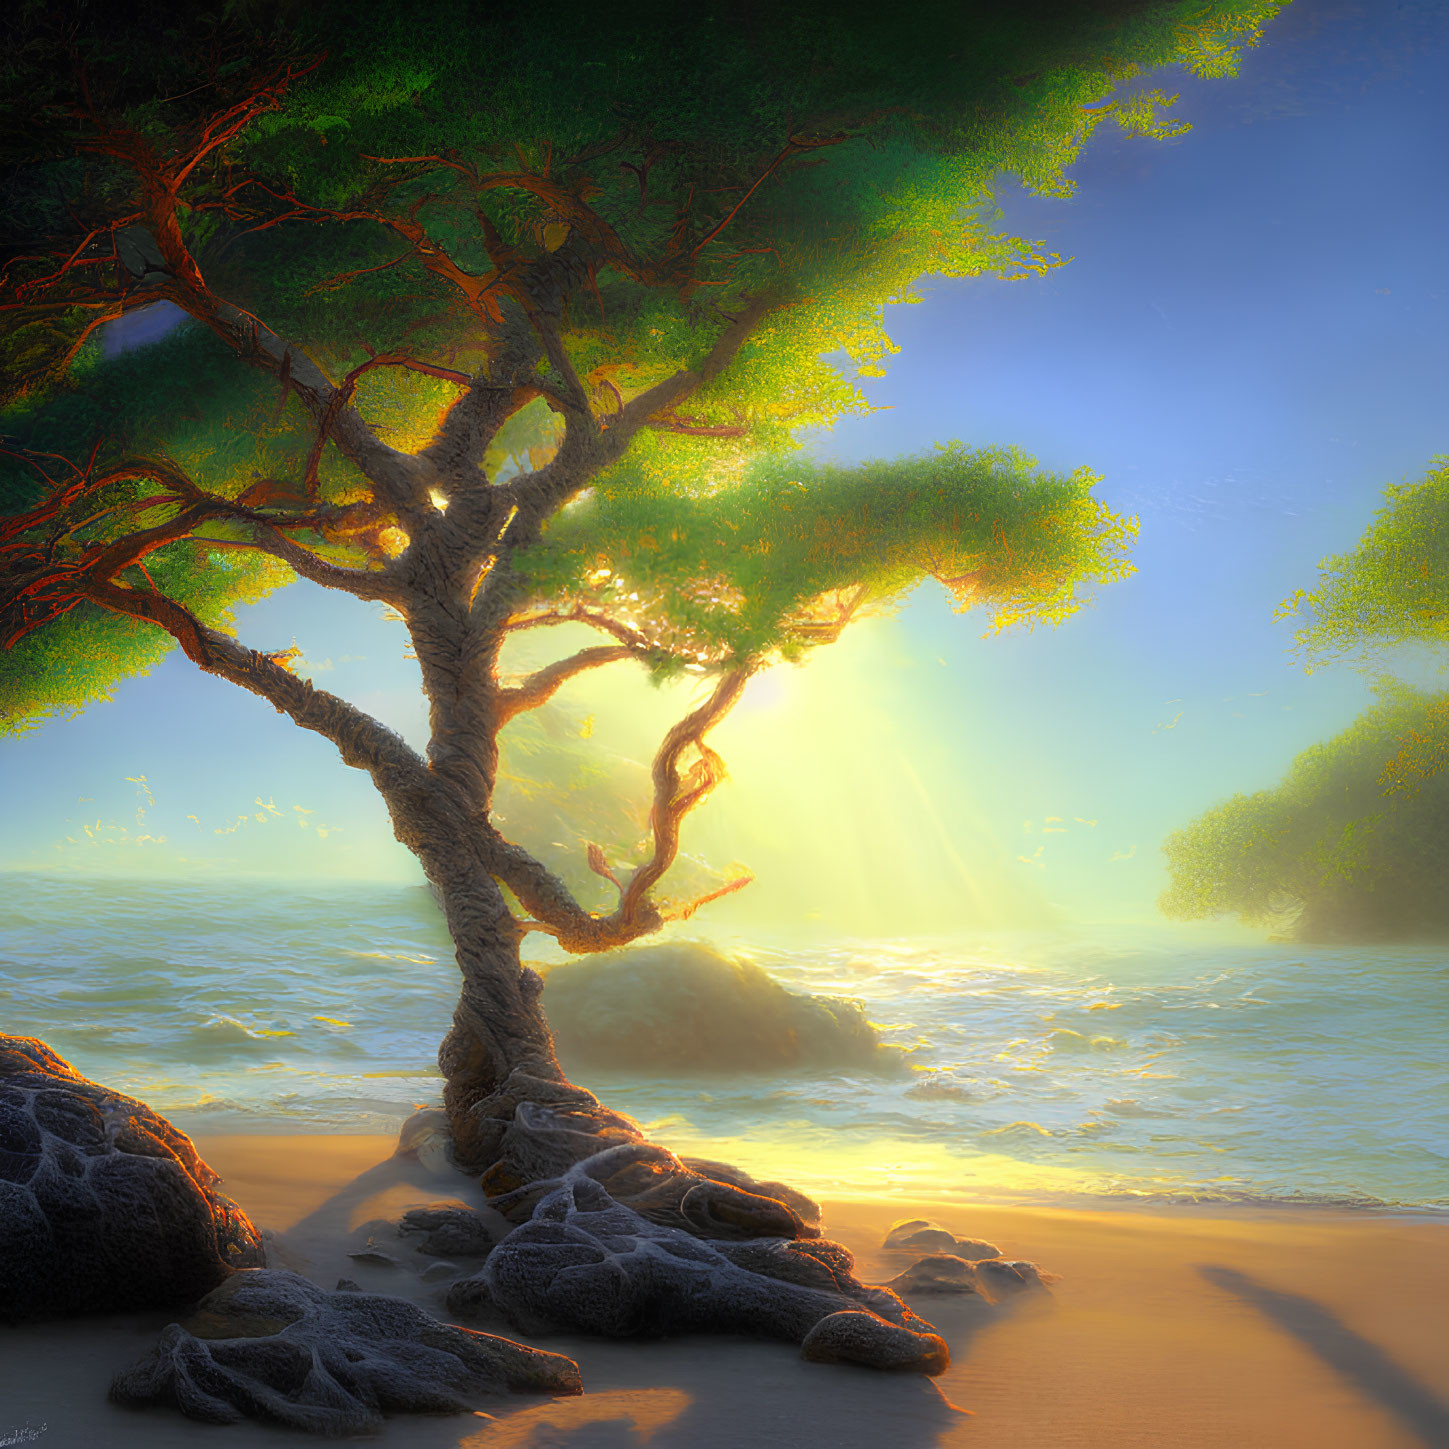 Twisted tree with lush canopy on sandy beach at sunset